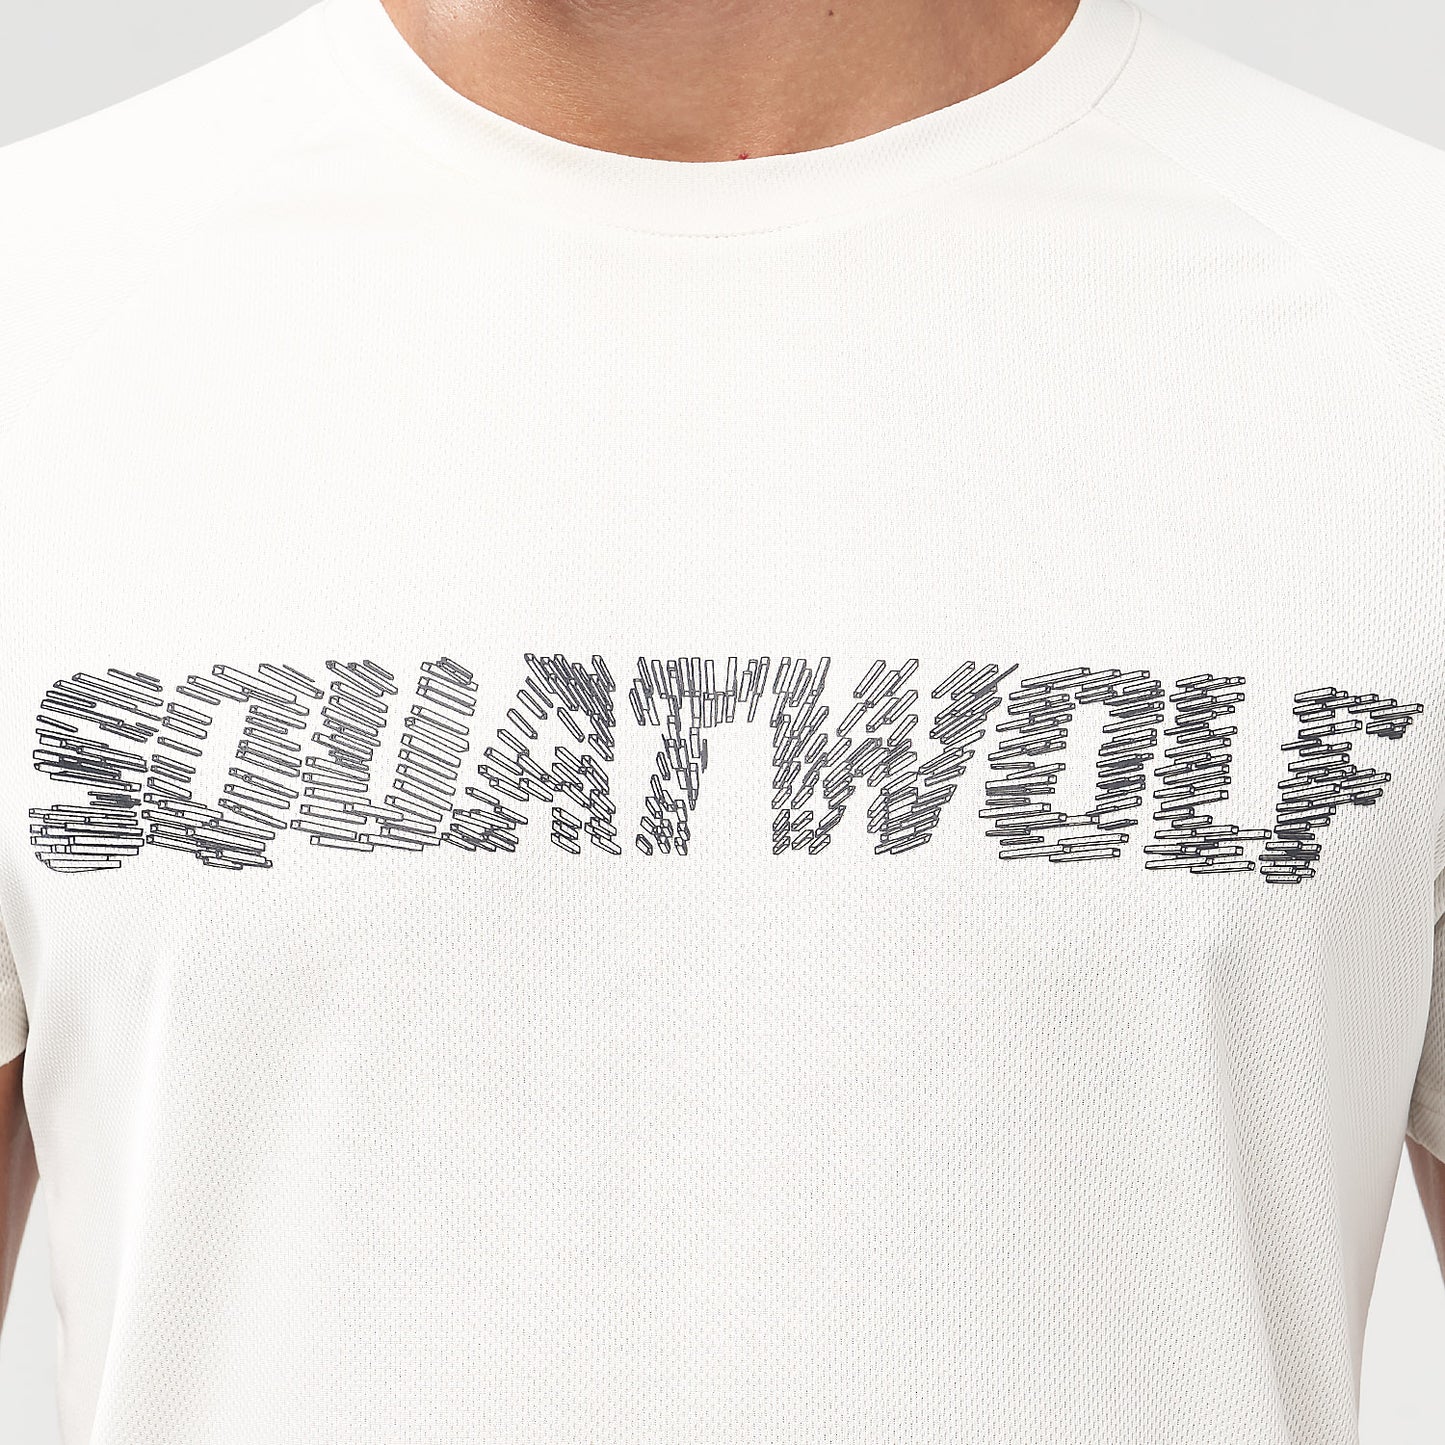 squatwolf-gym-wear-code-logo-muscle-tee-white-workout-shirts-for-men